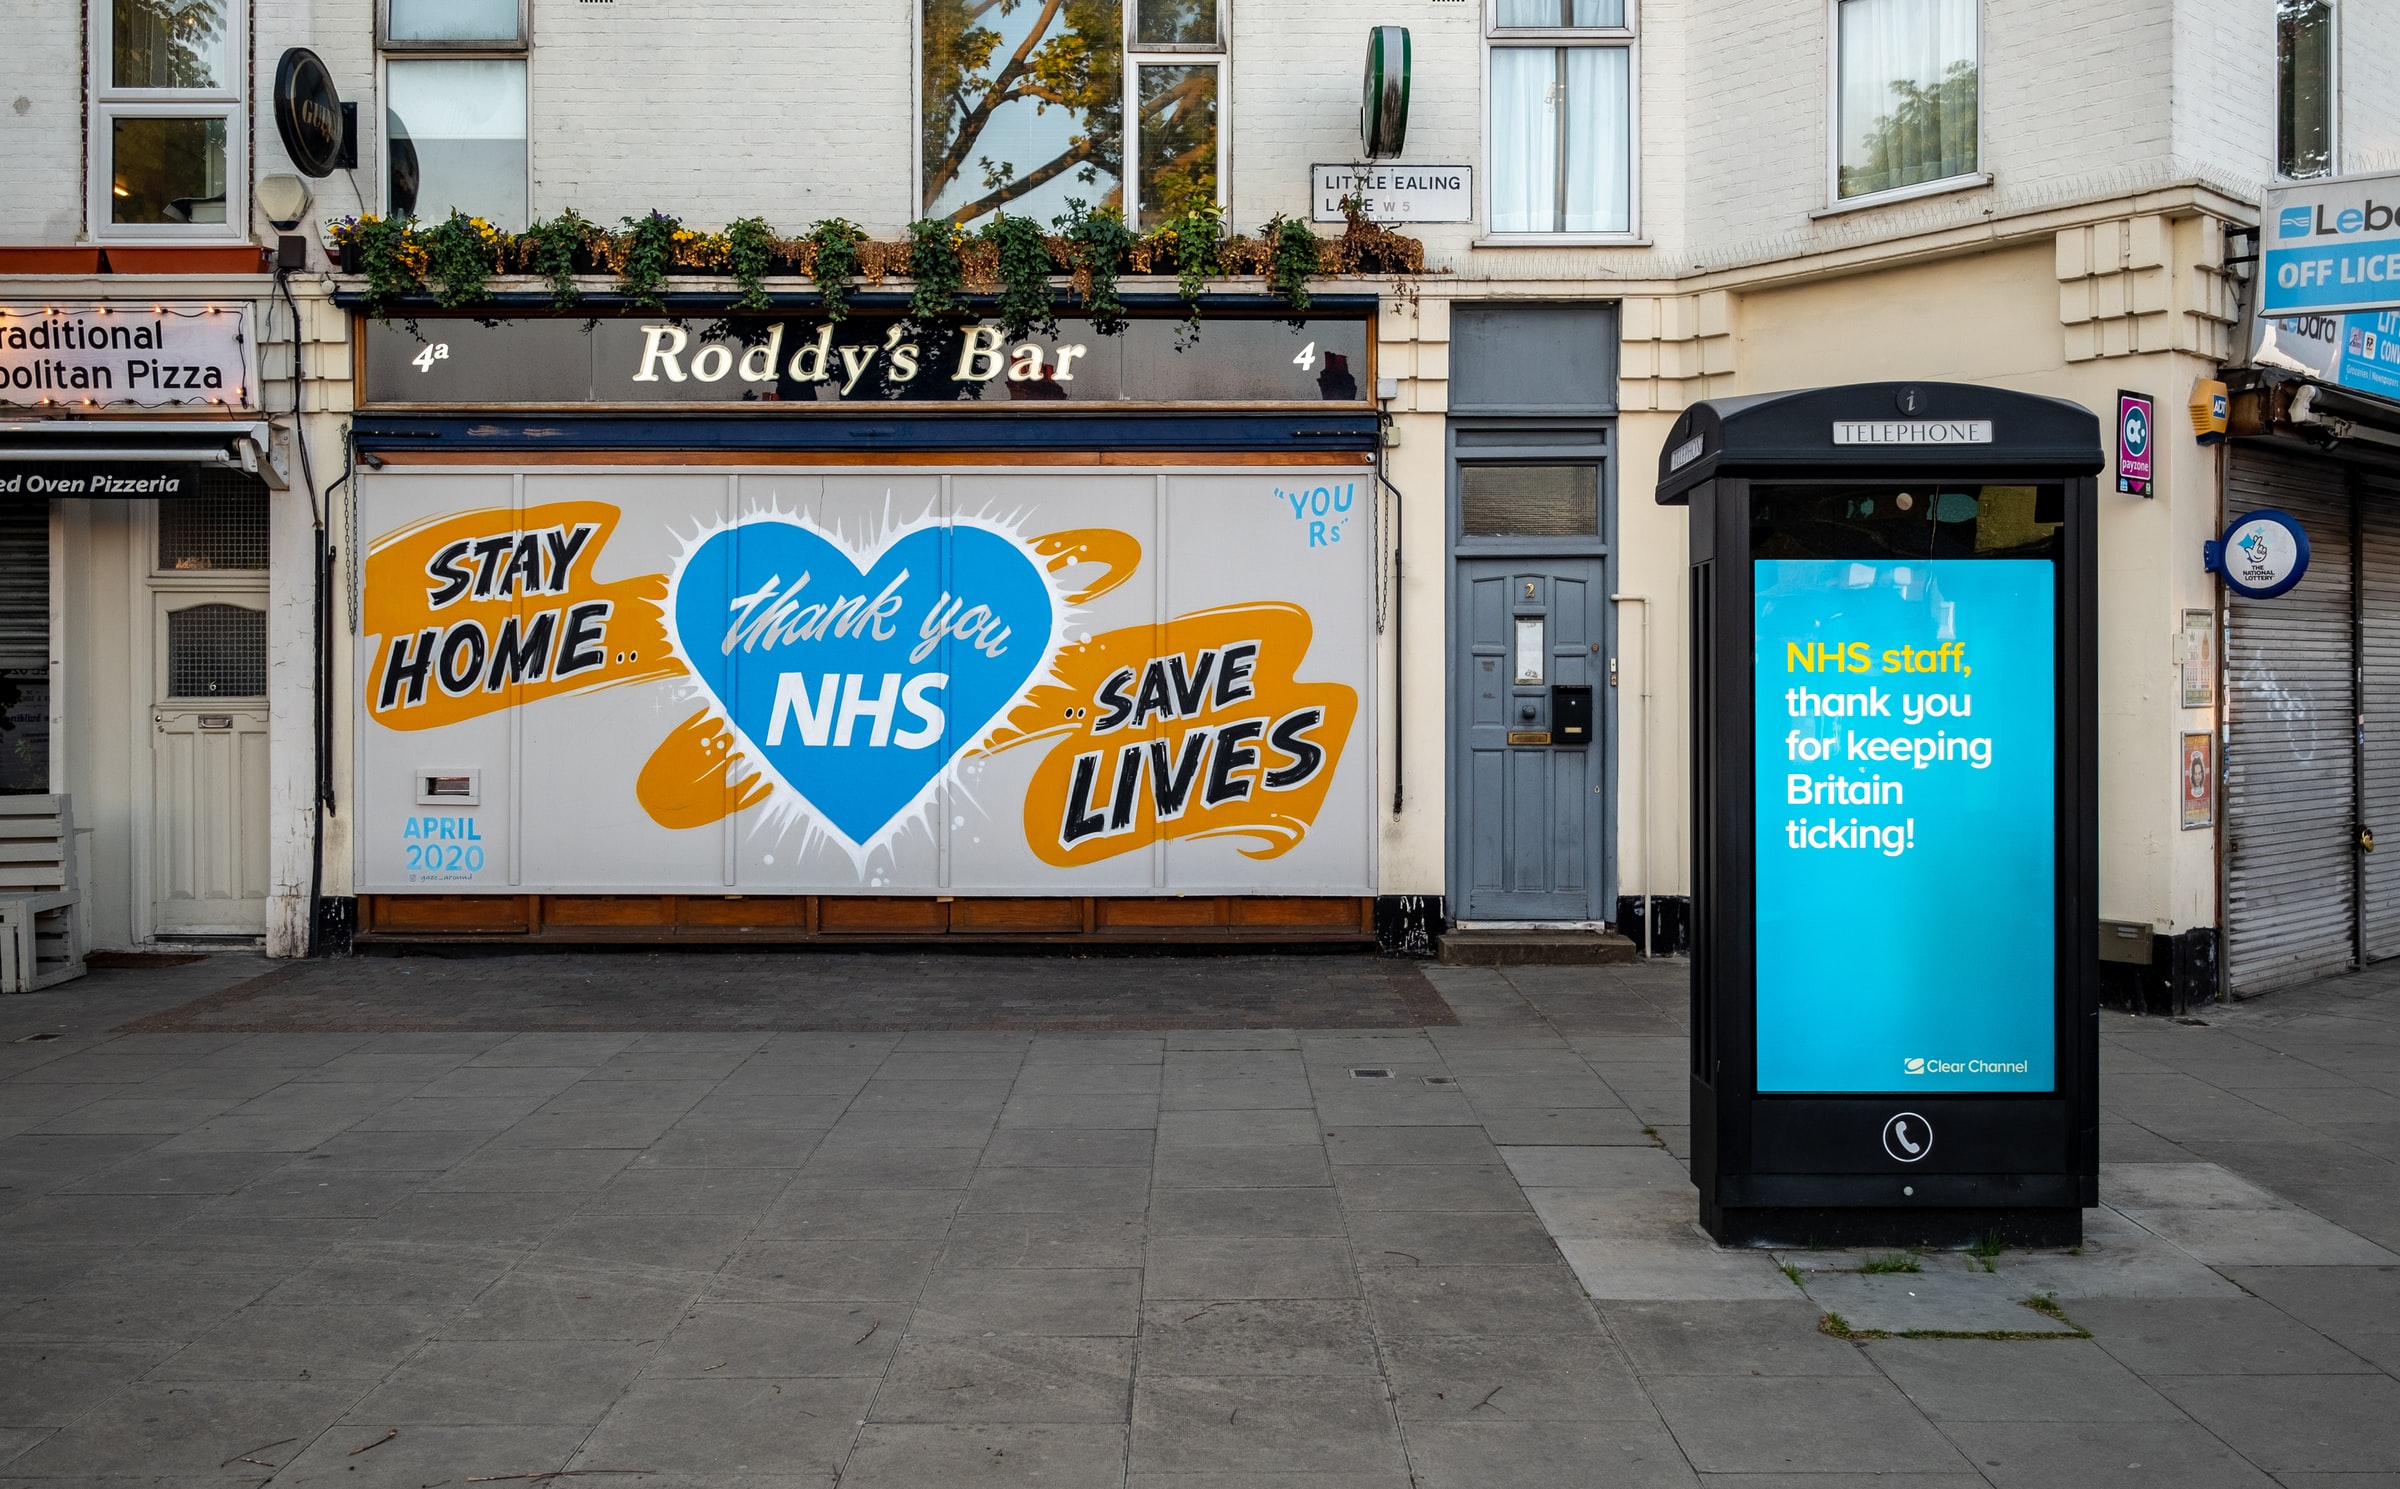 A shop front in Ealing in May 2020, showing a brightly-coloured painted message "Thank you NHS. Stay Home. Save Lives."